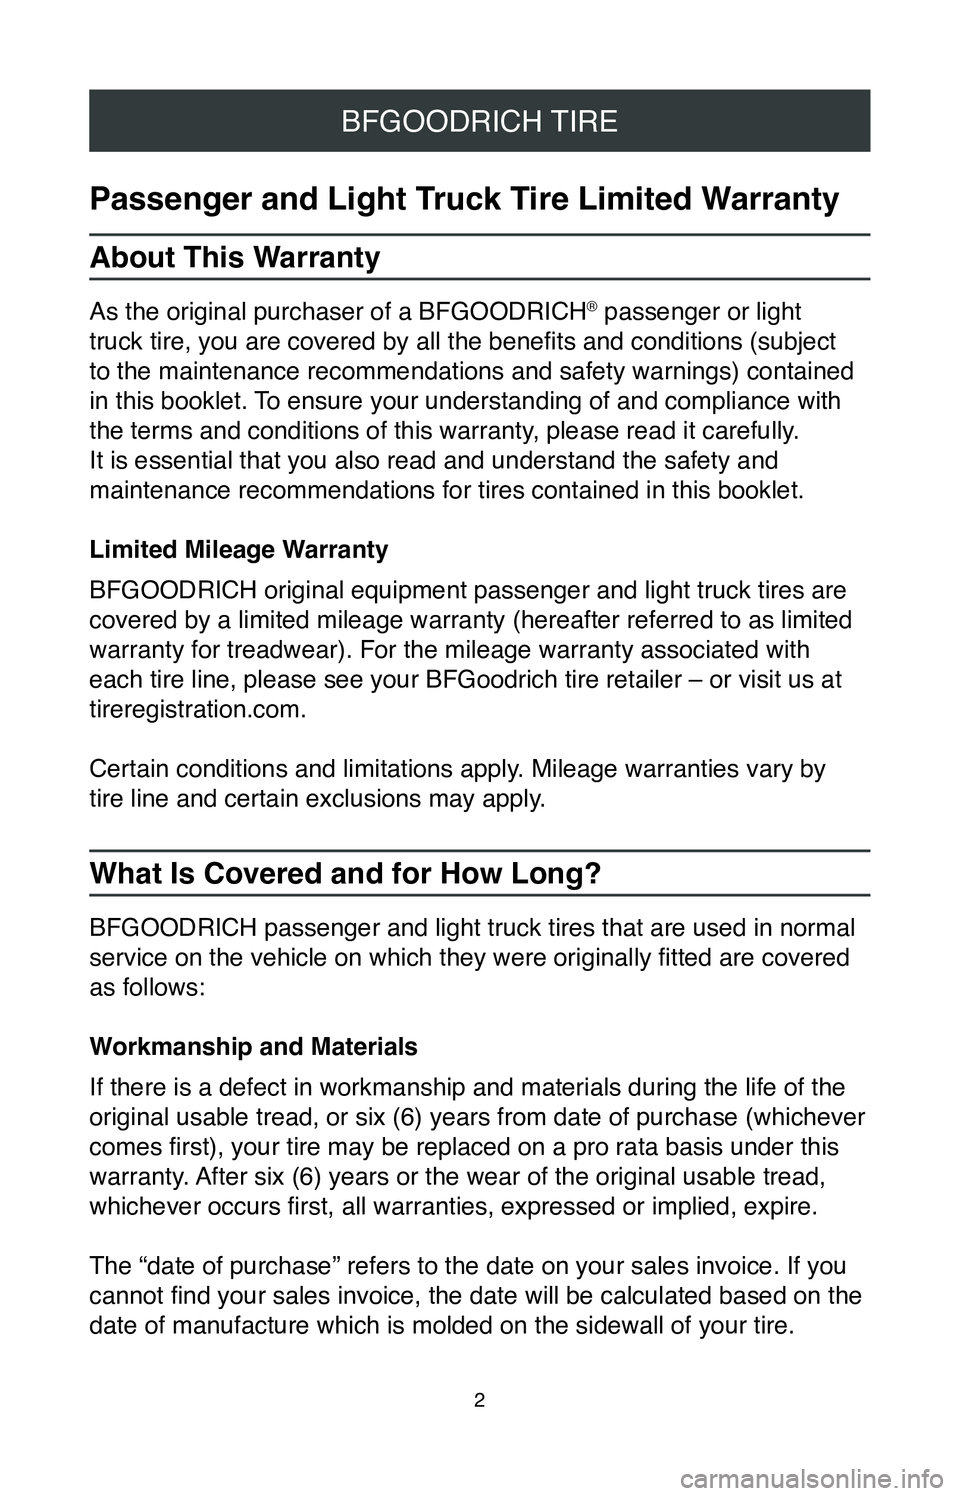 TOYOTA HIGHLANDER 2020  Warranties & Maintenance Guides (in English) 2
BFGOODRICH TIRE
Passenger and Light Truck Tire Limited Warranty
About This Warranty
As the original purchaser of a BFGOODRICH® passenger or light 
truck tire, you are covered by all the benefits an